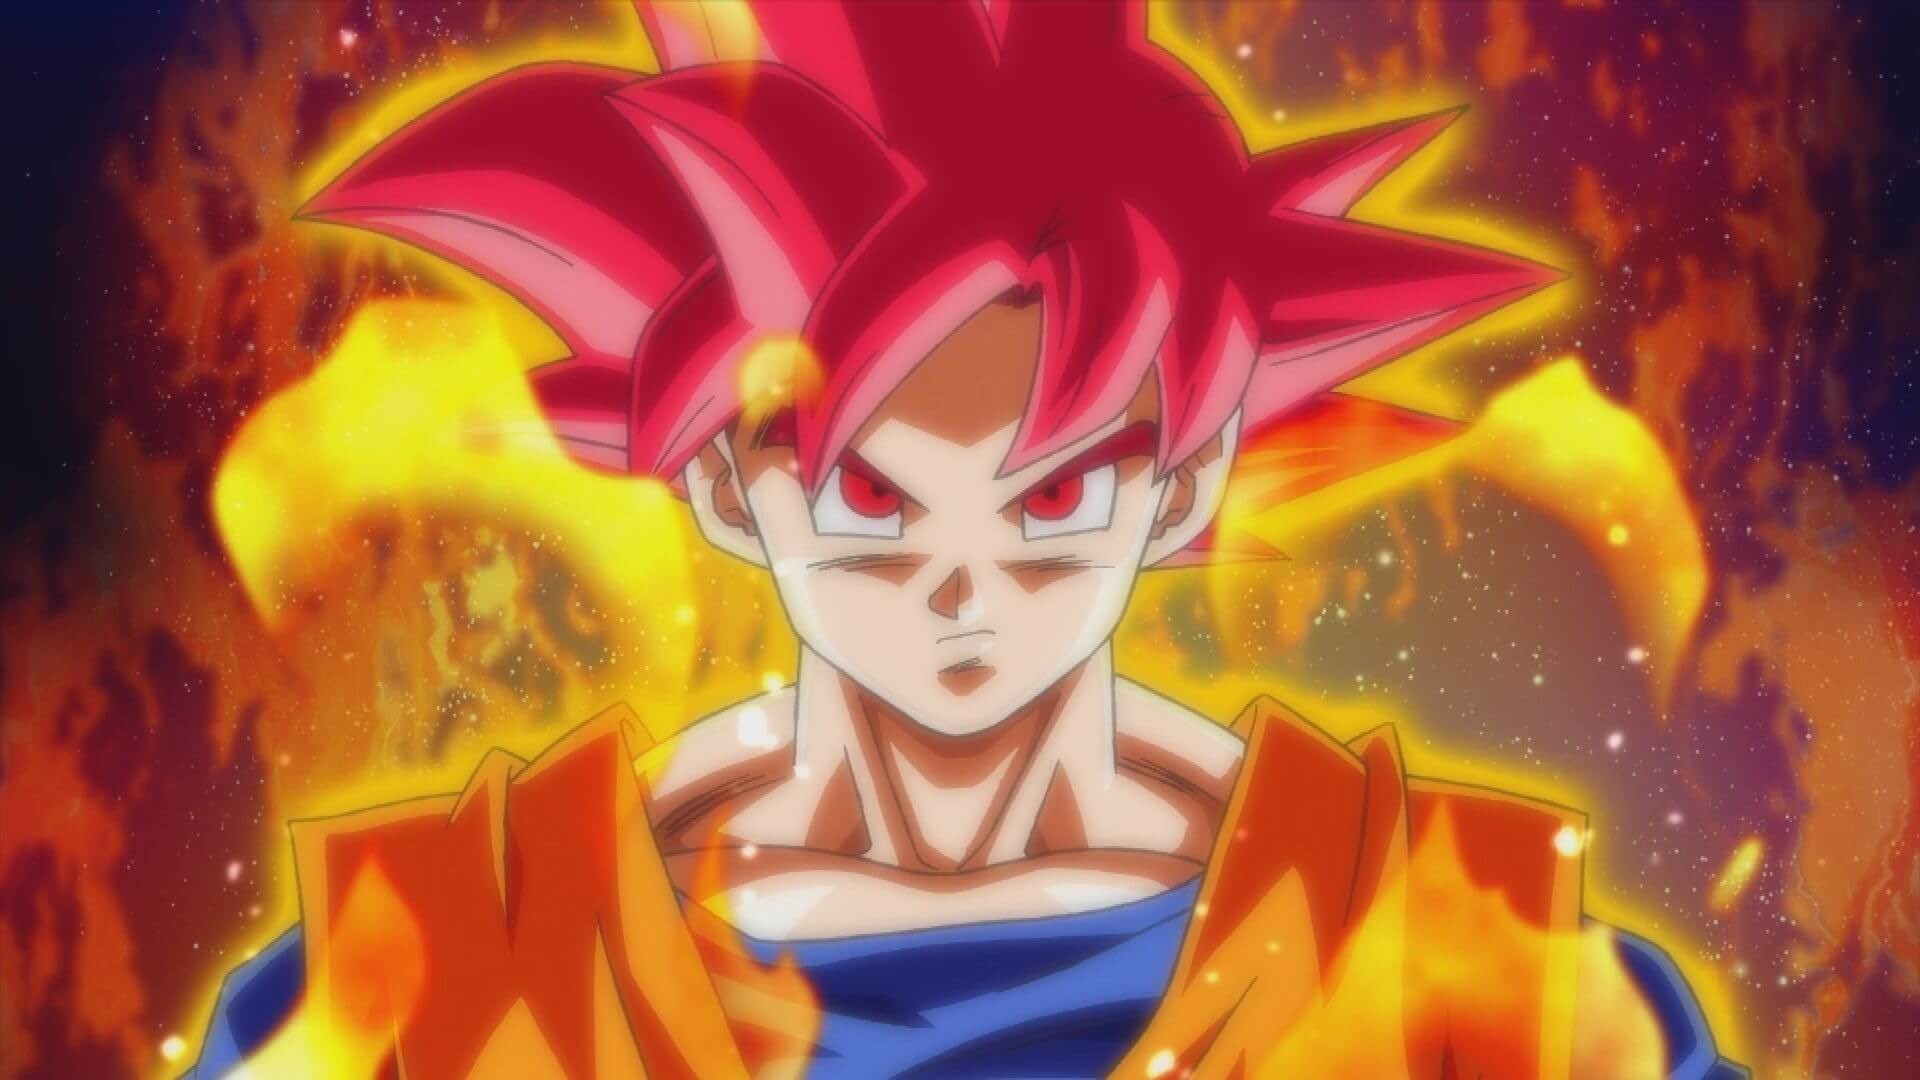 Goku Super Saiyan God Desktop Backgrounds HD with resolution 1920X1080 pixel. You can use this wallpaper as background for your desktop Computer Screensavers, Android or iPhone smartphones